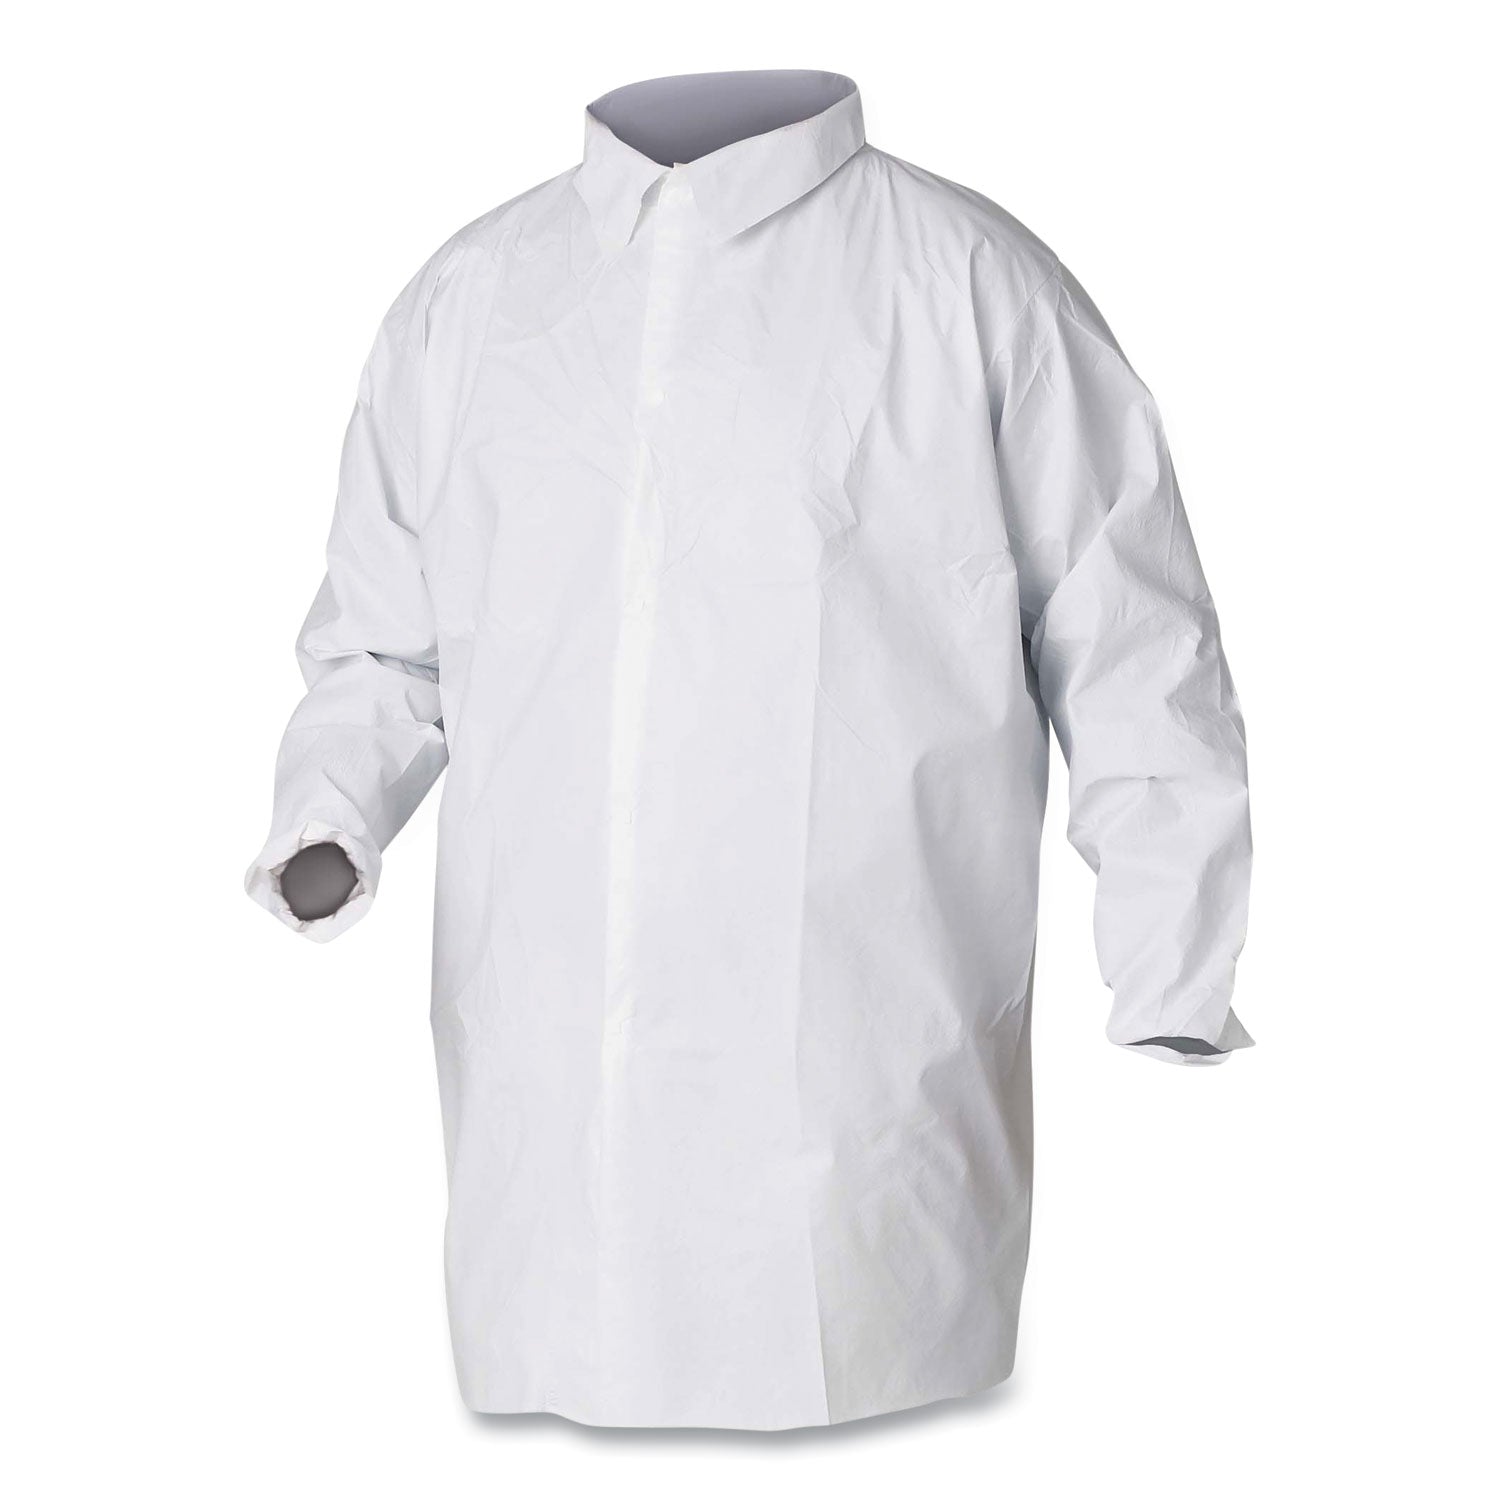 a20-breathable-particle-protection-lab-coat-hook-and-loop-closure-elastic-wrists-no-pockets-large-white-30-carton_kcc35620 - 1